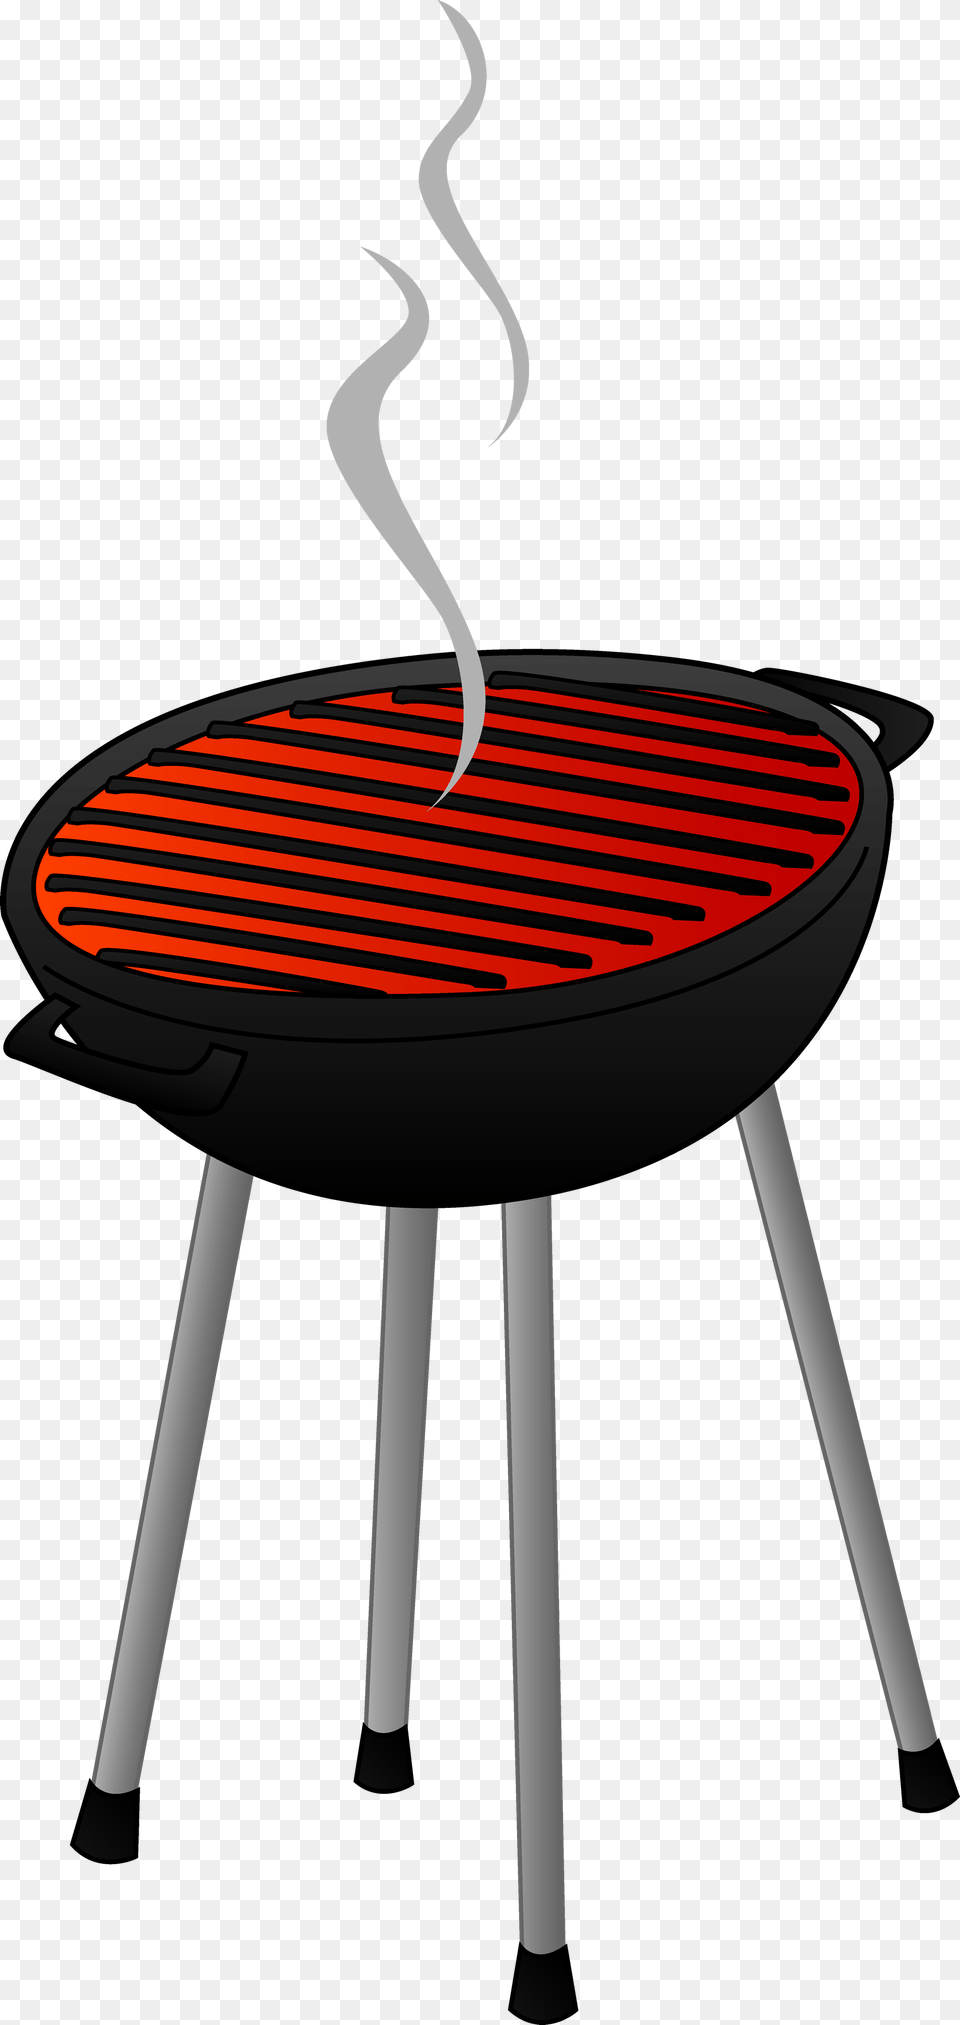 Grill, Bbq, Cooking, Food, Grilling Free Png Download